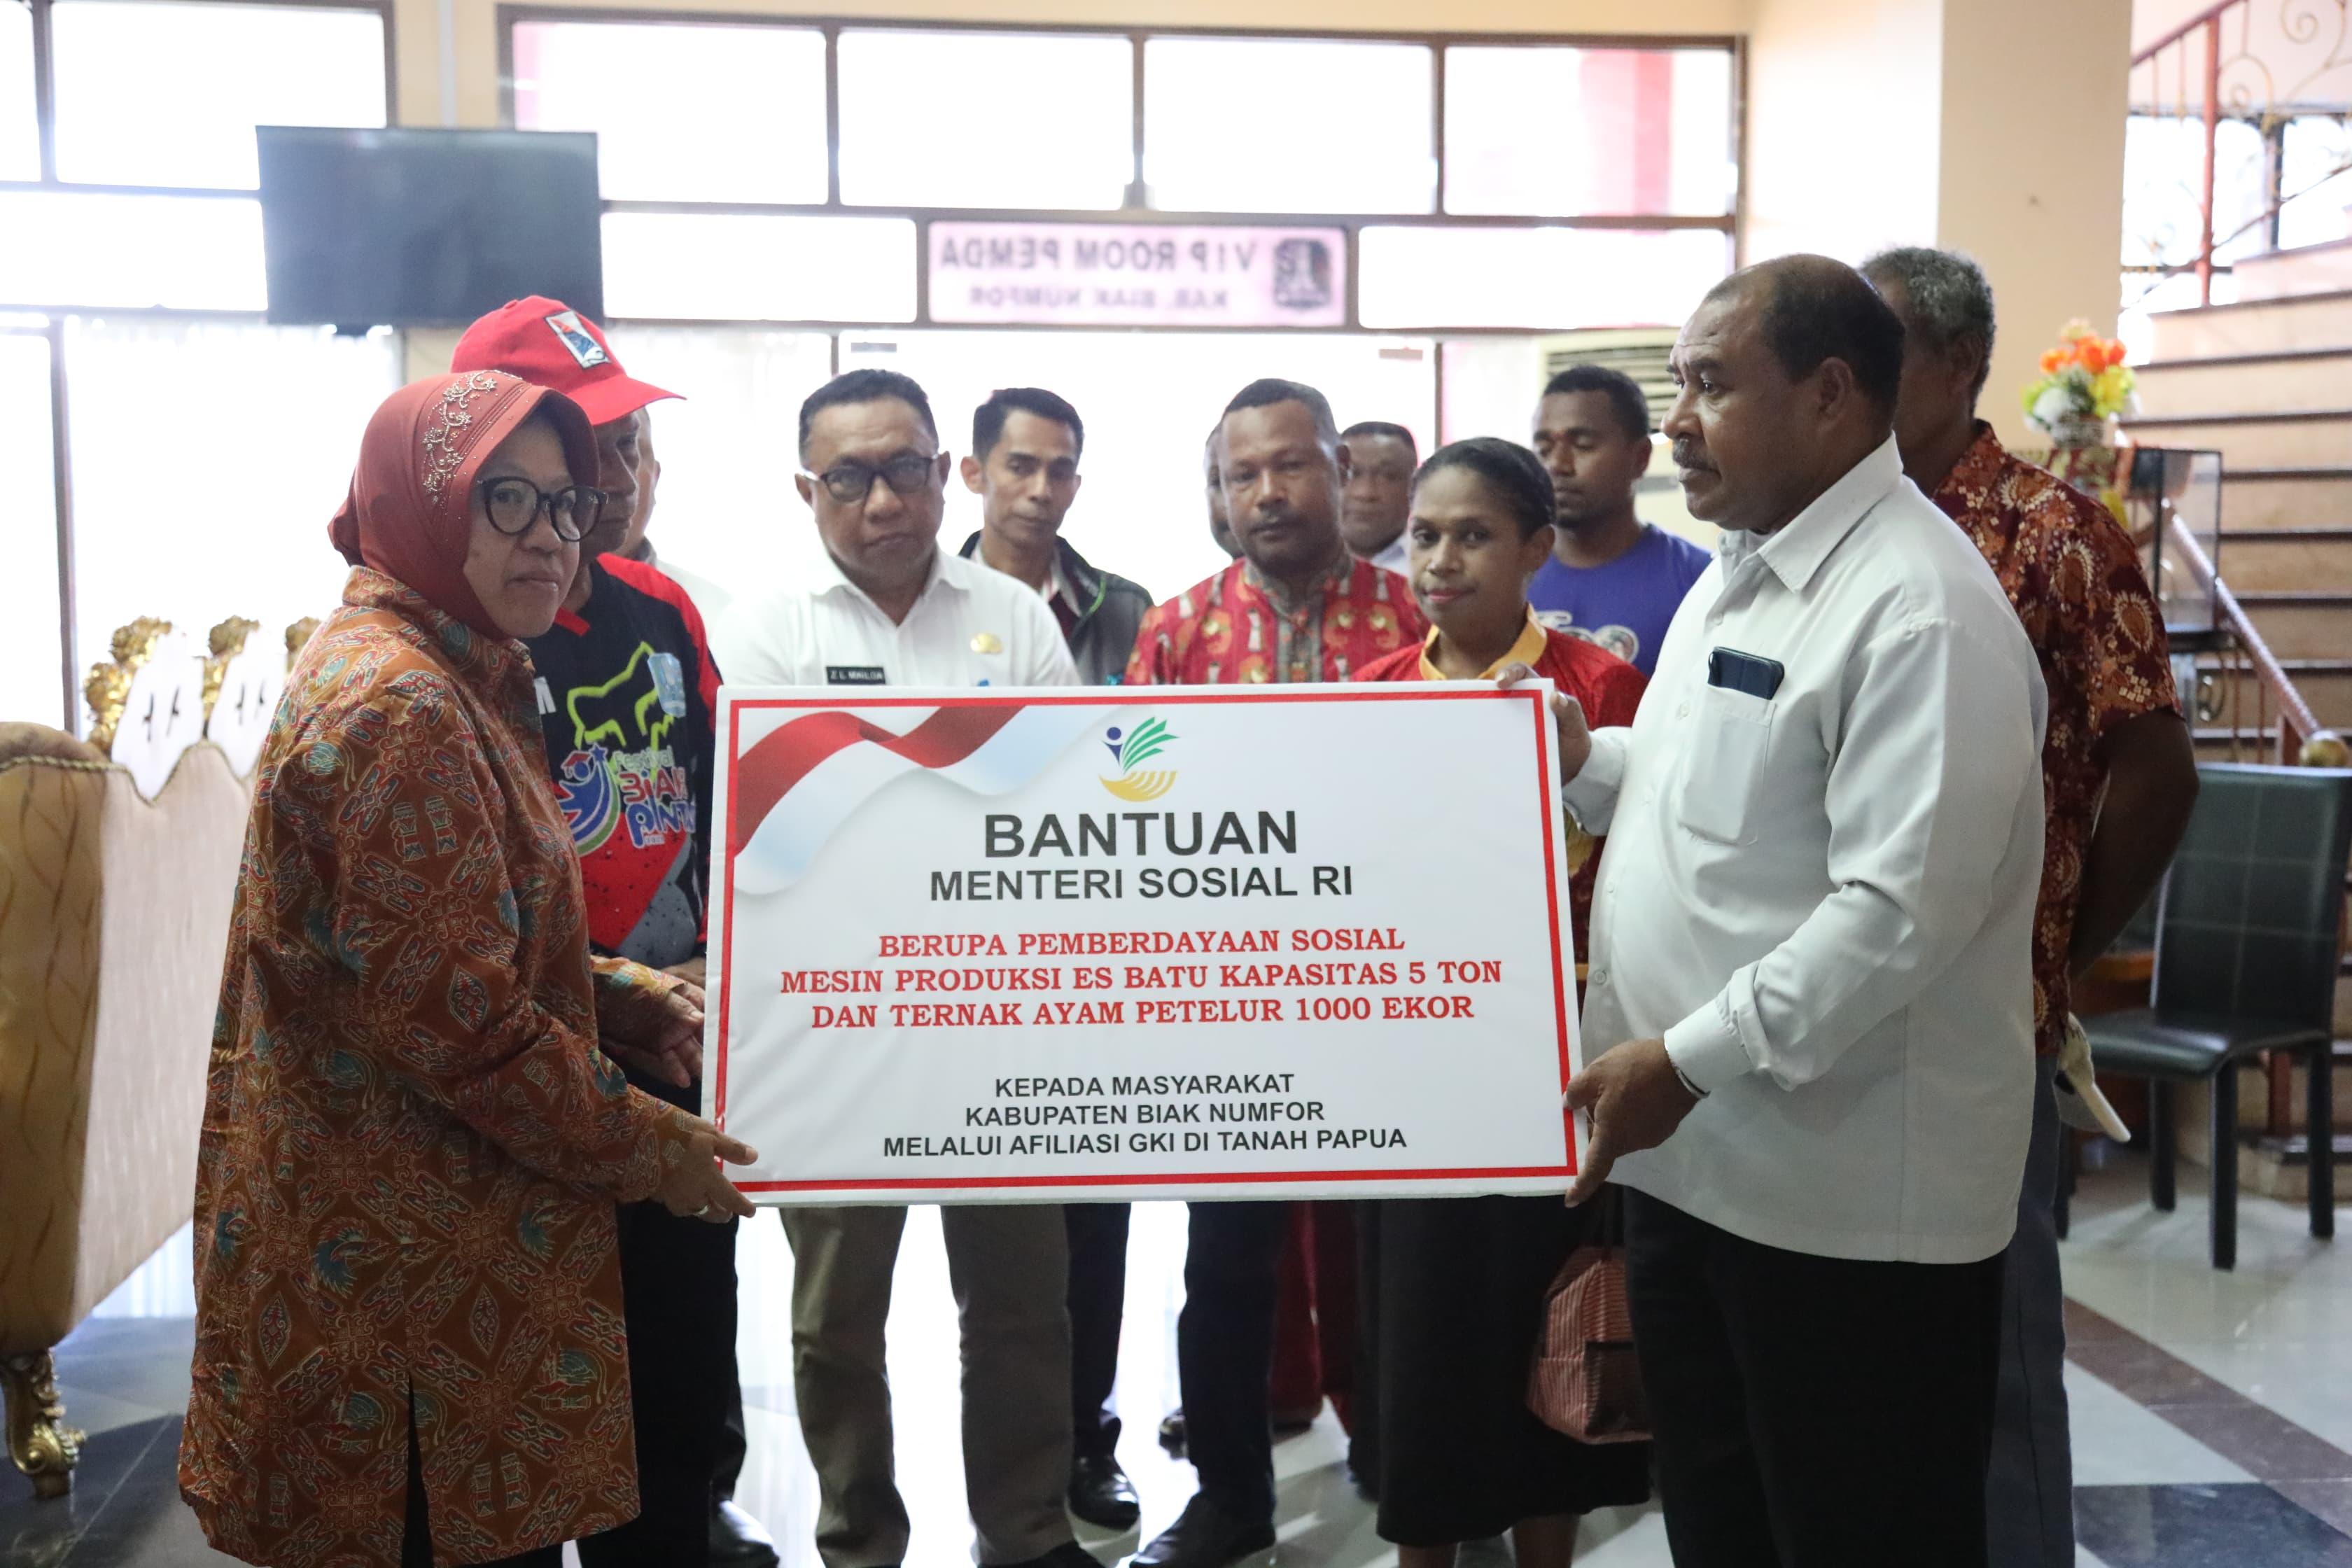 Social Affairs Minister Hand Over Social Empowerment Aid for Biak Numfor Residents